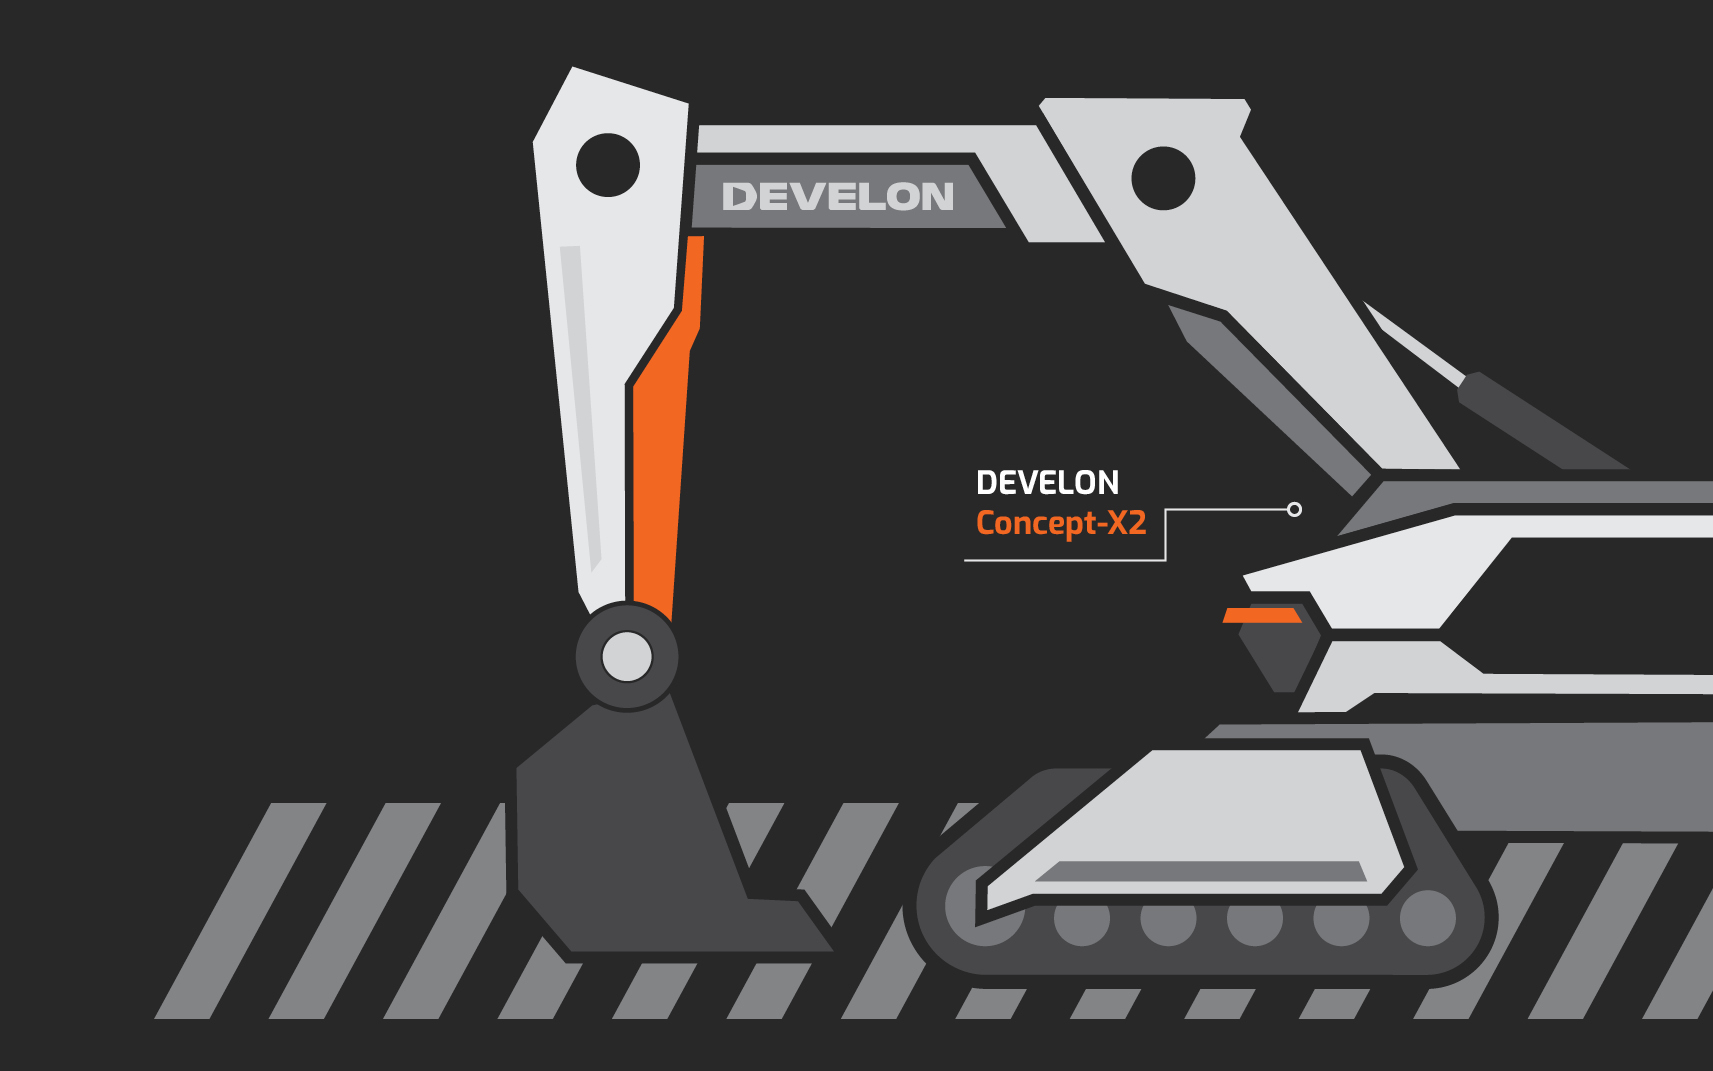 An illustration of a futuristic-looking excavator from DEVELON with “DEVELON Concept-X2” text overlaying the illustration.